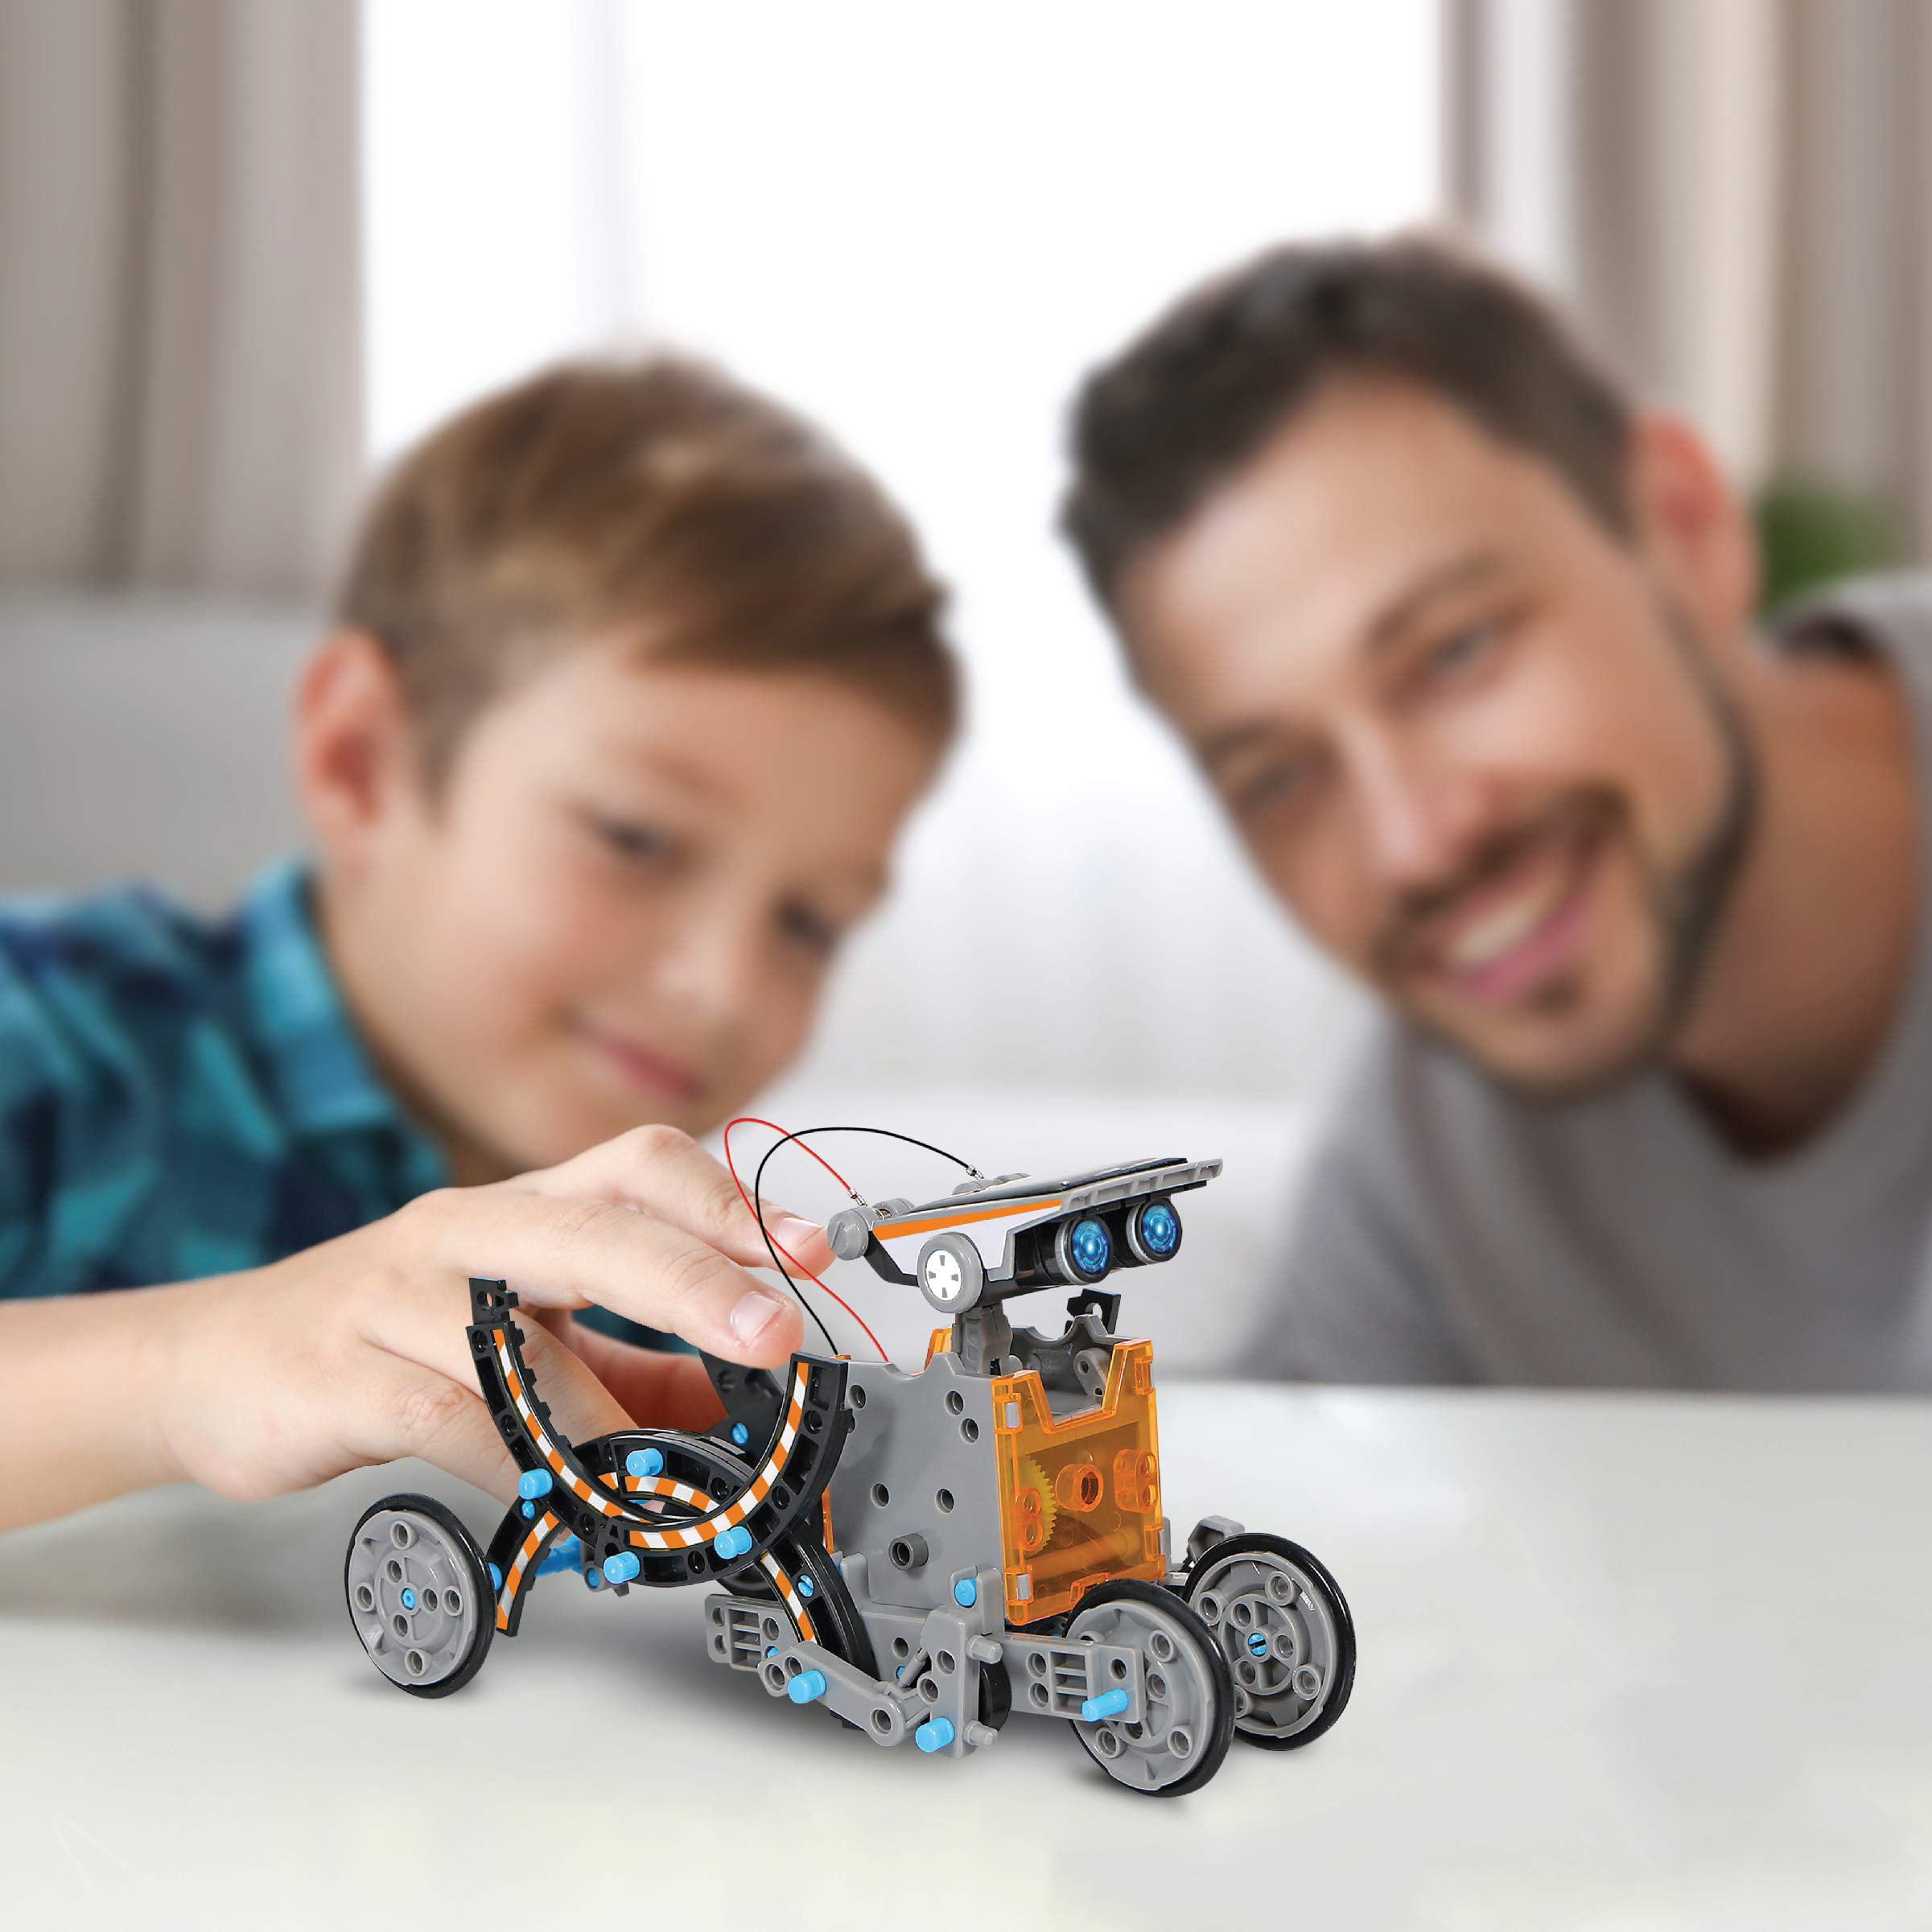 for sale online Discovery Kids Mindblown STEM 12-in-1 Solar Robot Creation 190-Piece Kit 1006973 